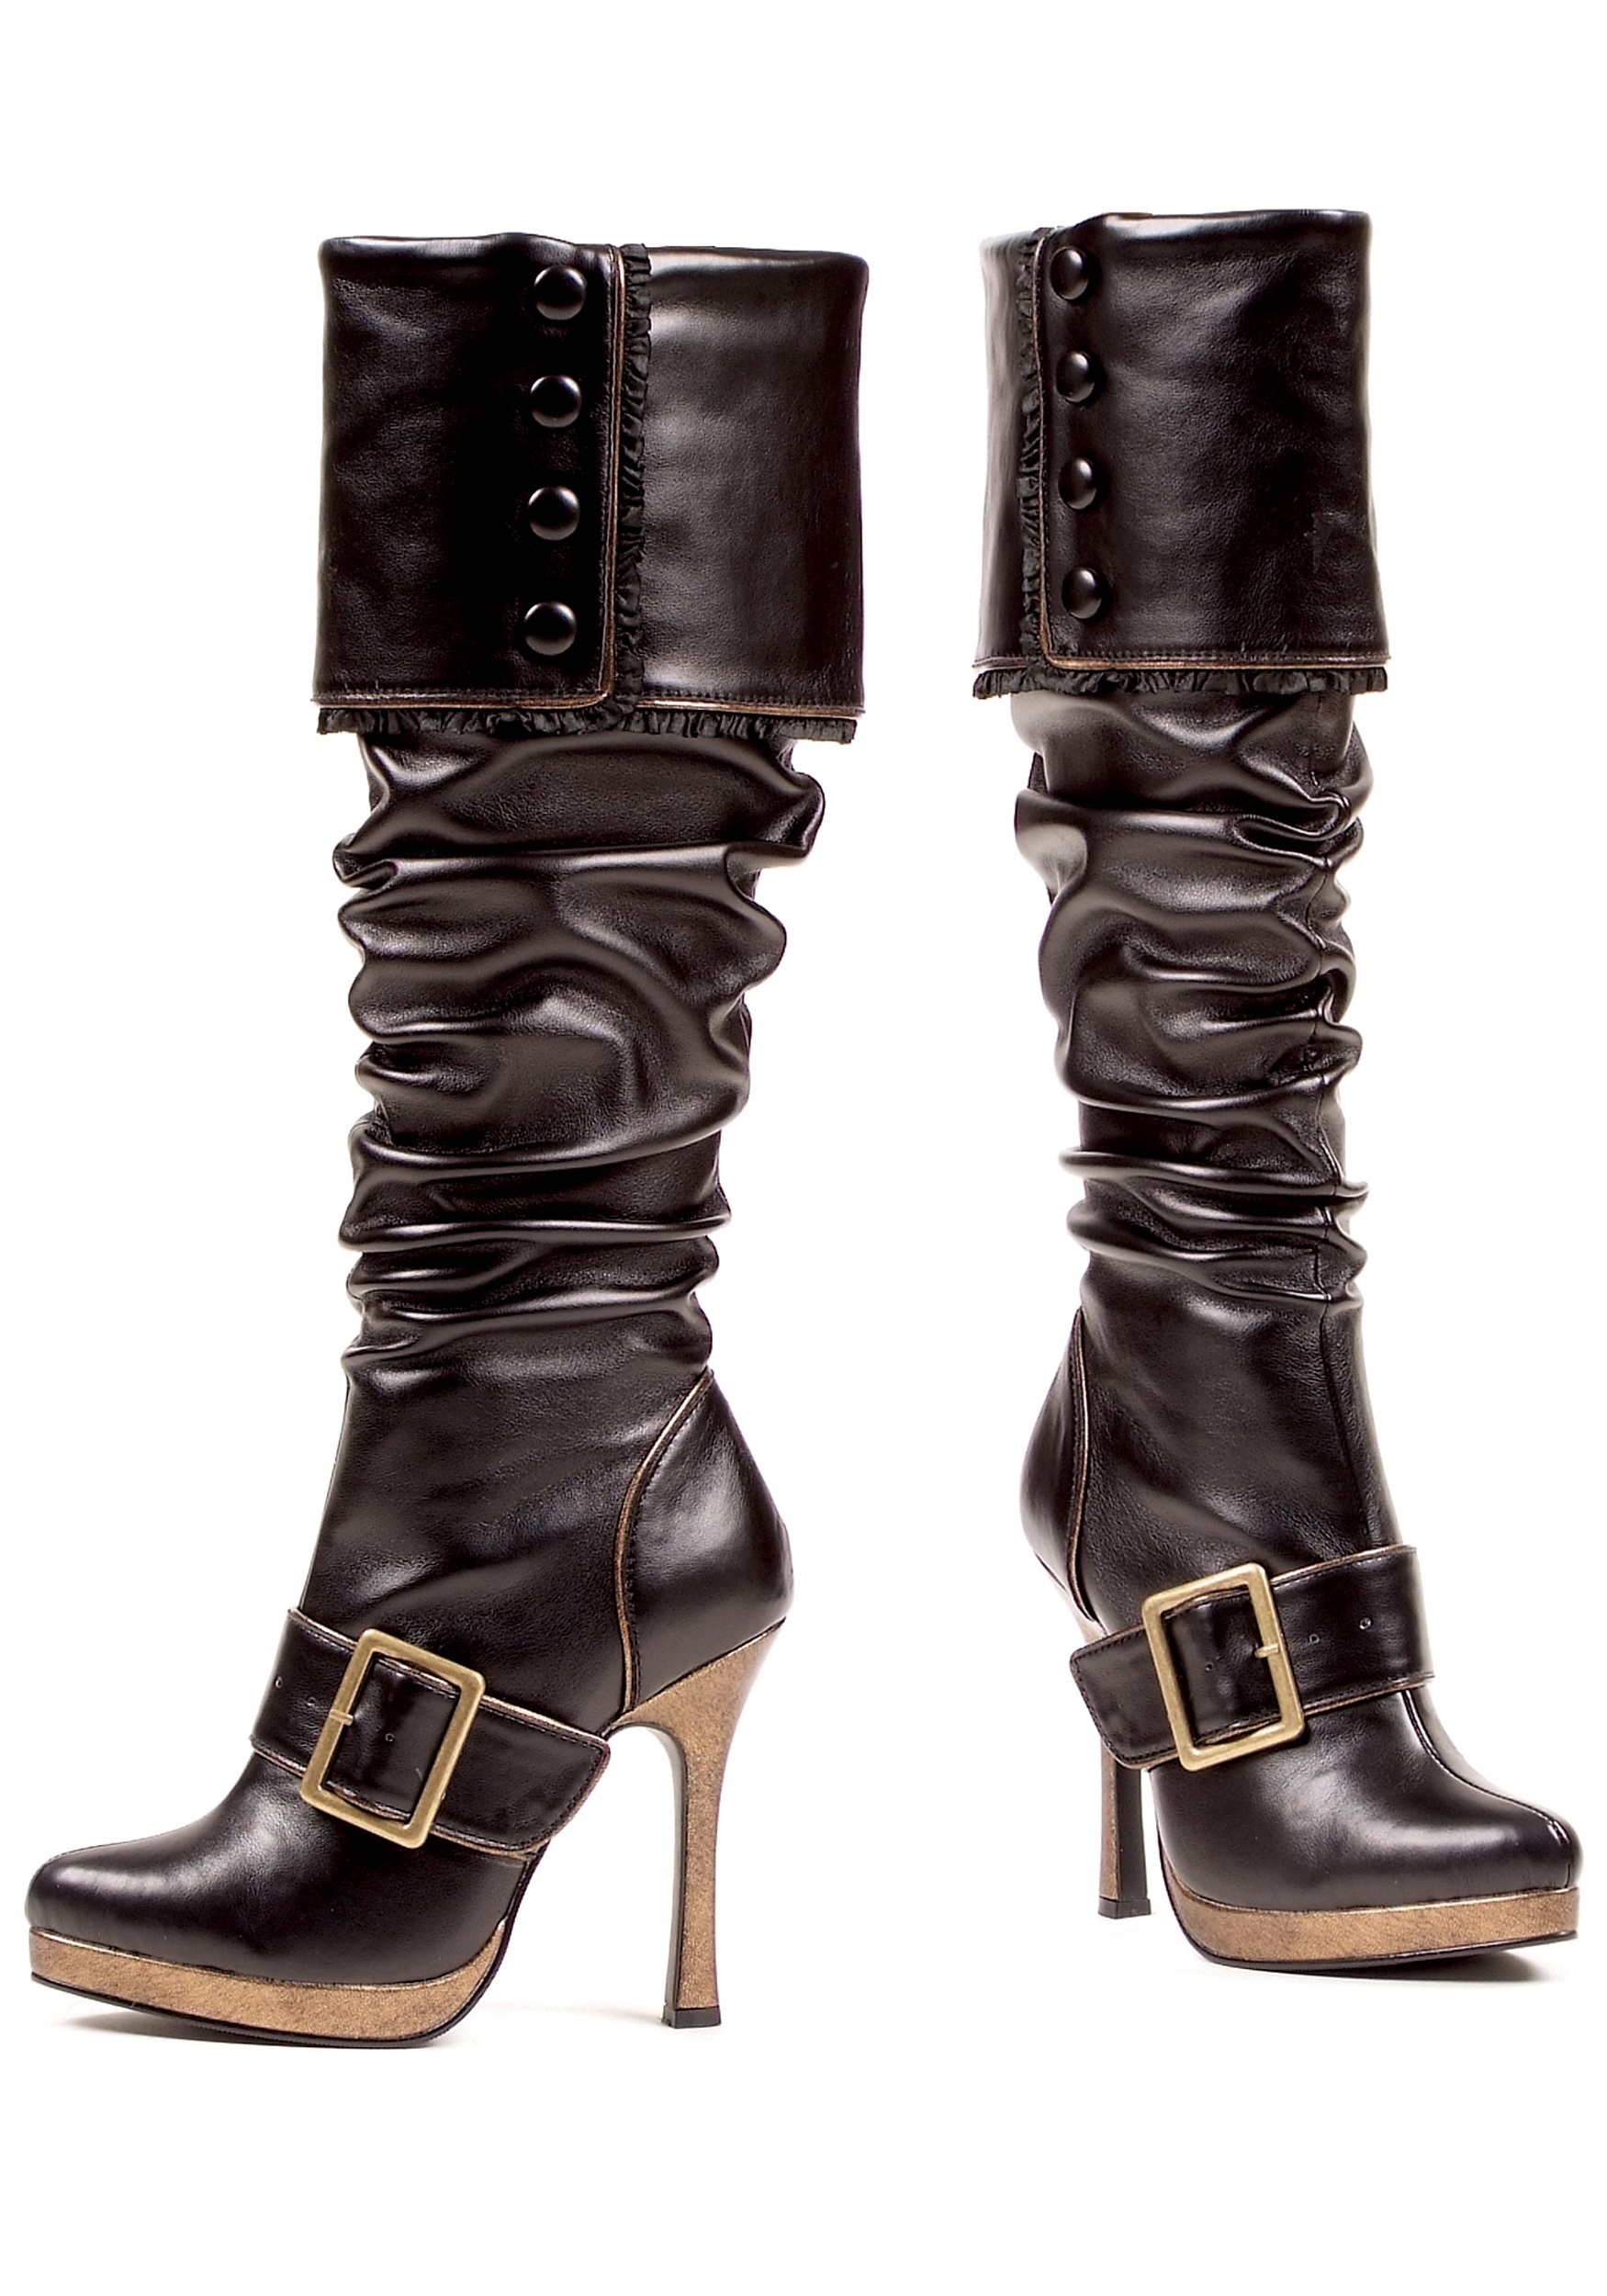 Image of Women's Sexy Buckle Pirate Boots ID EE426GRACE-6